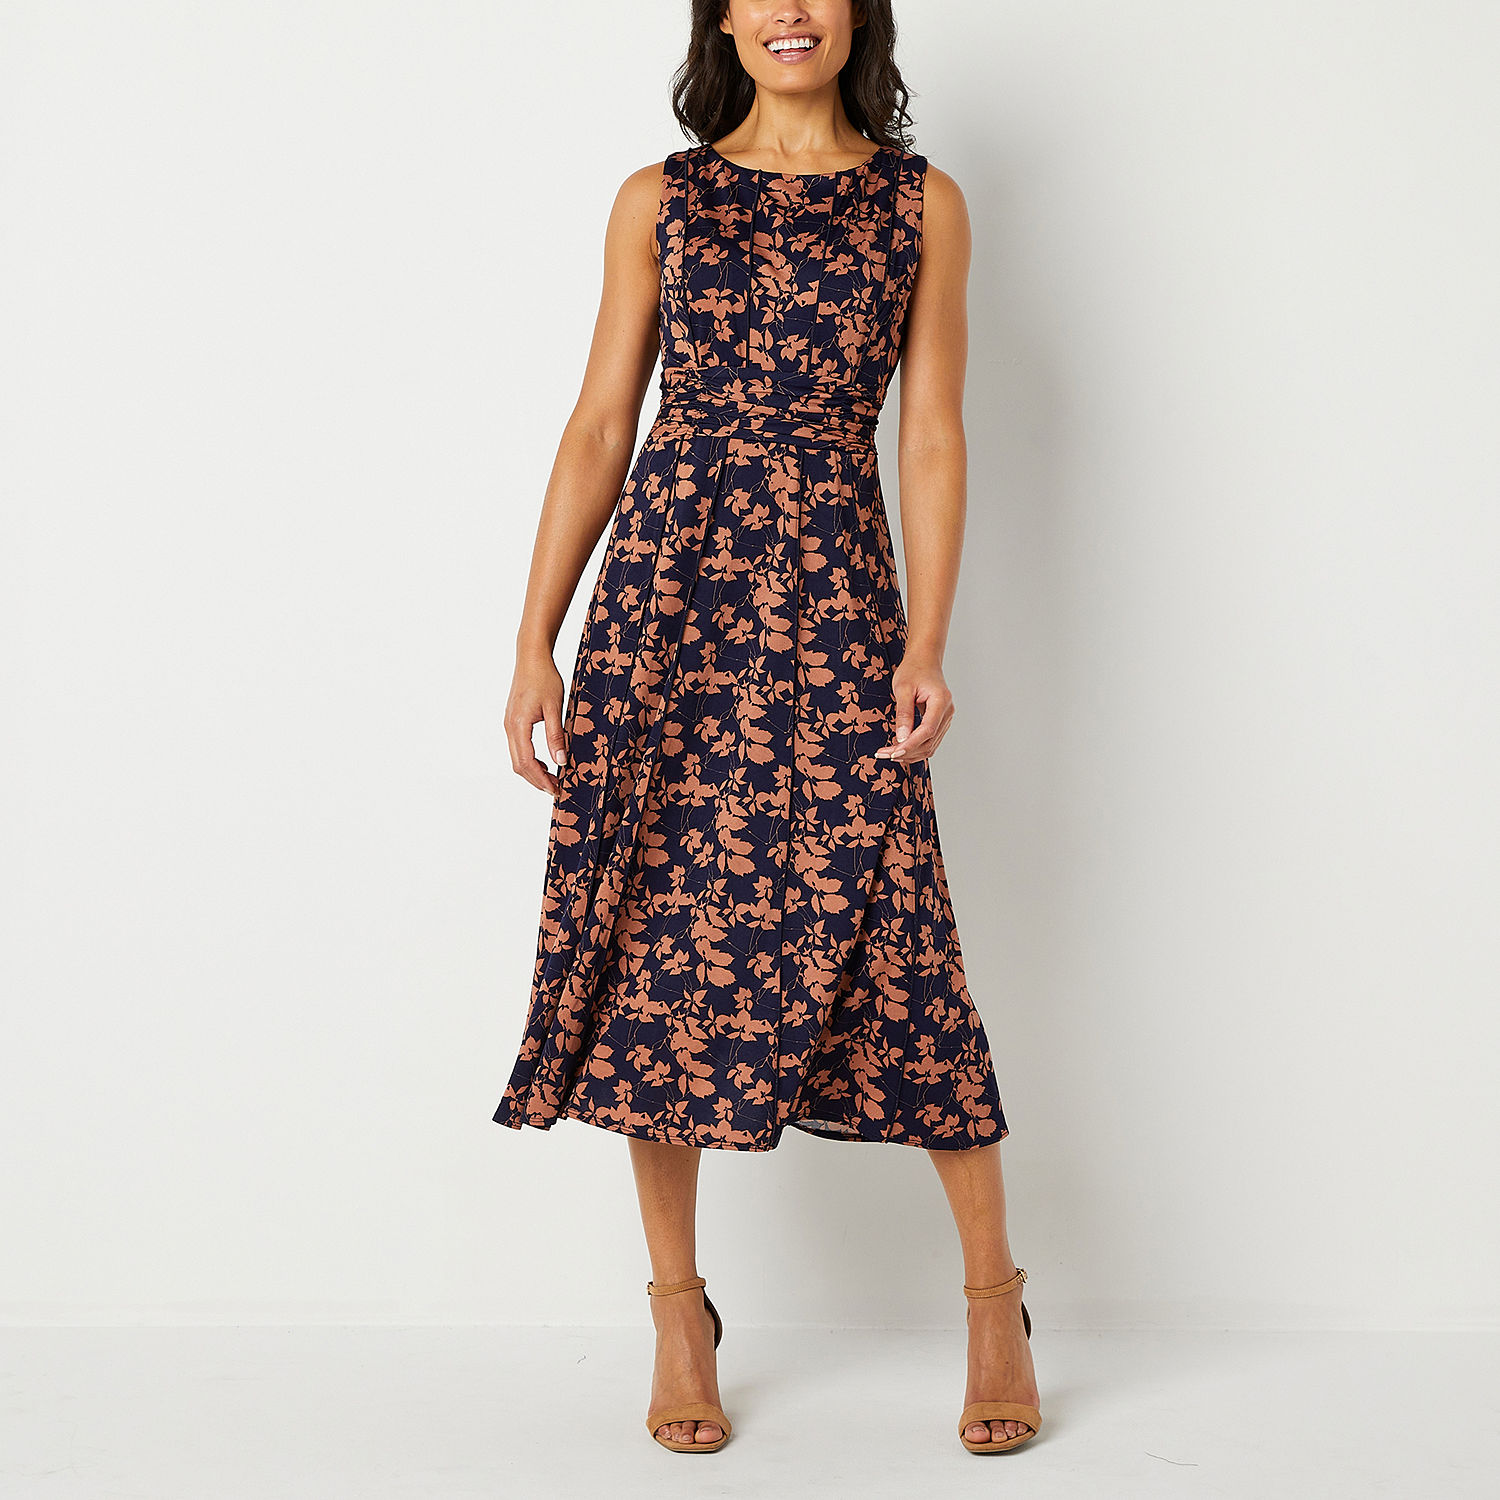 Perceptions Sleeveless Midi Fit + Flare Dress, Color: Navy Brown - JCPenney